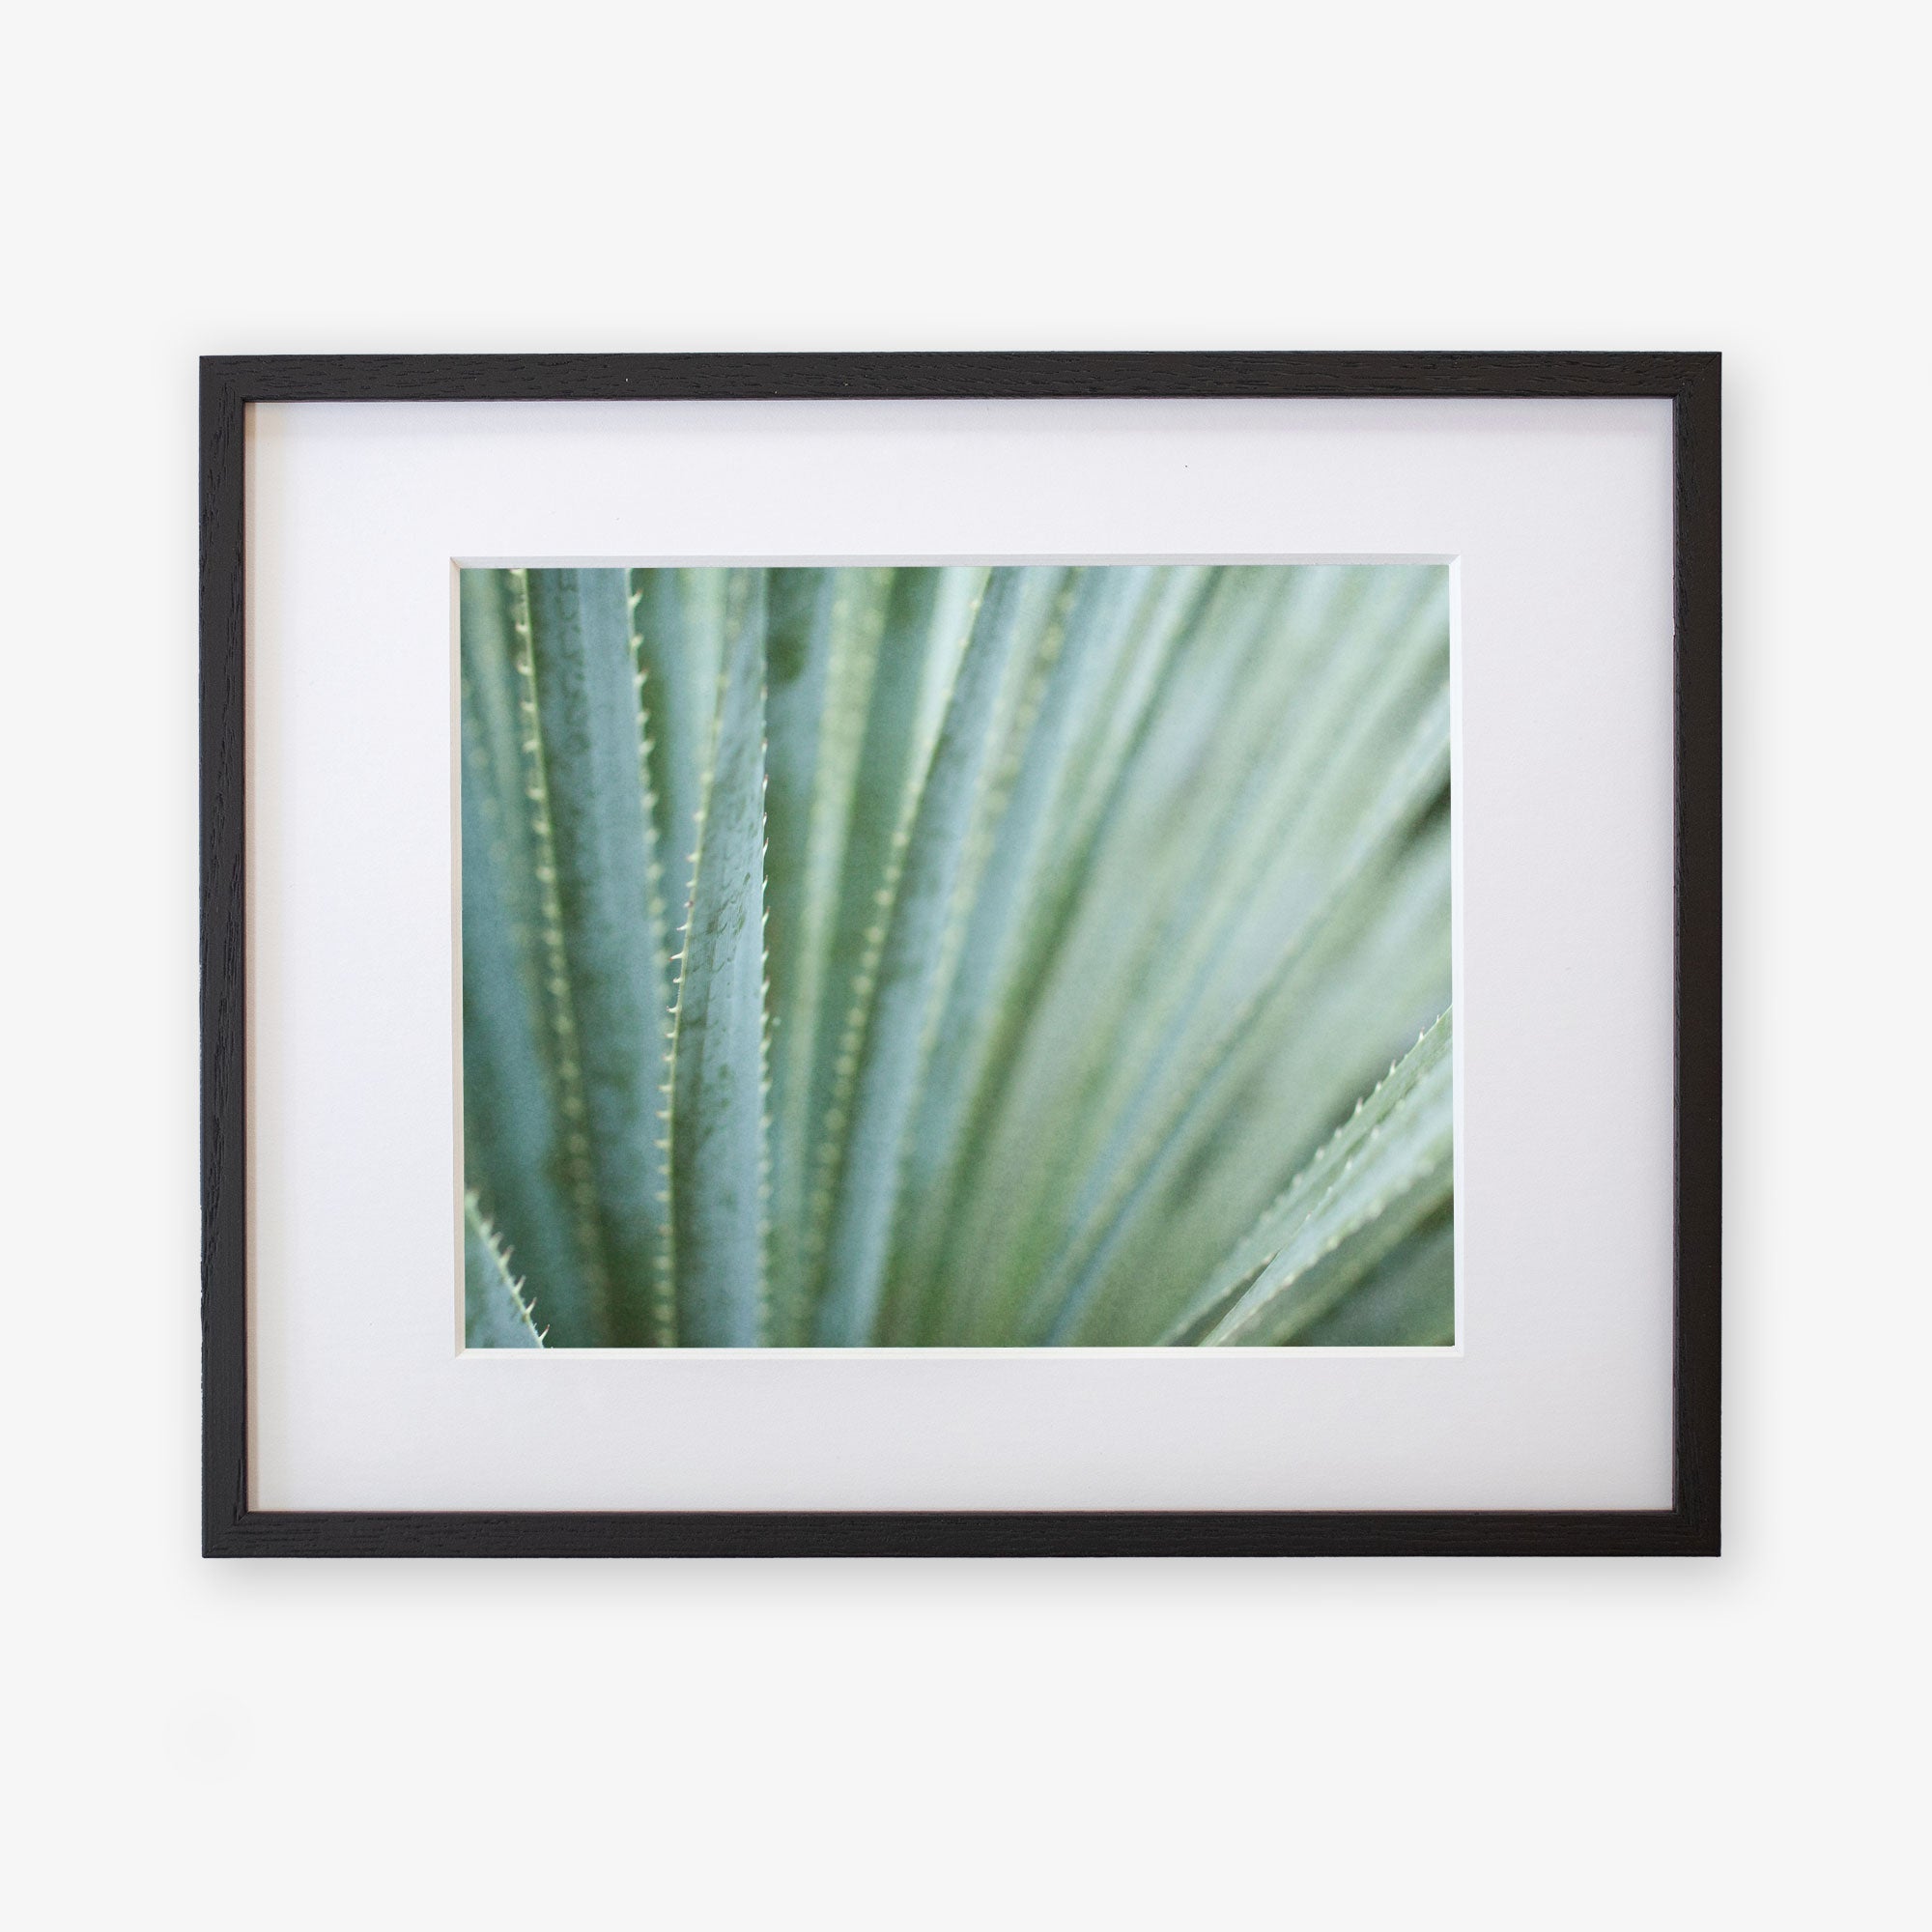 A framed photograph of an Abstract Green Botanical Print, &#39;Strands and Spikes&#39; by Offley Green, displayed against a white background within a black frame.